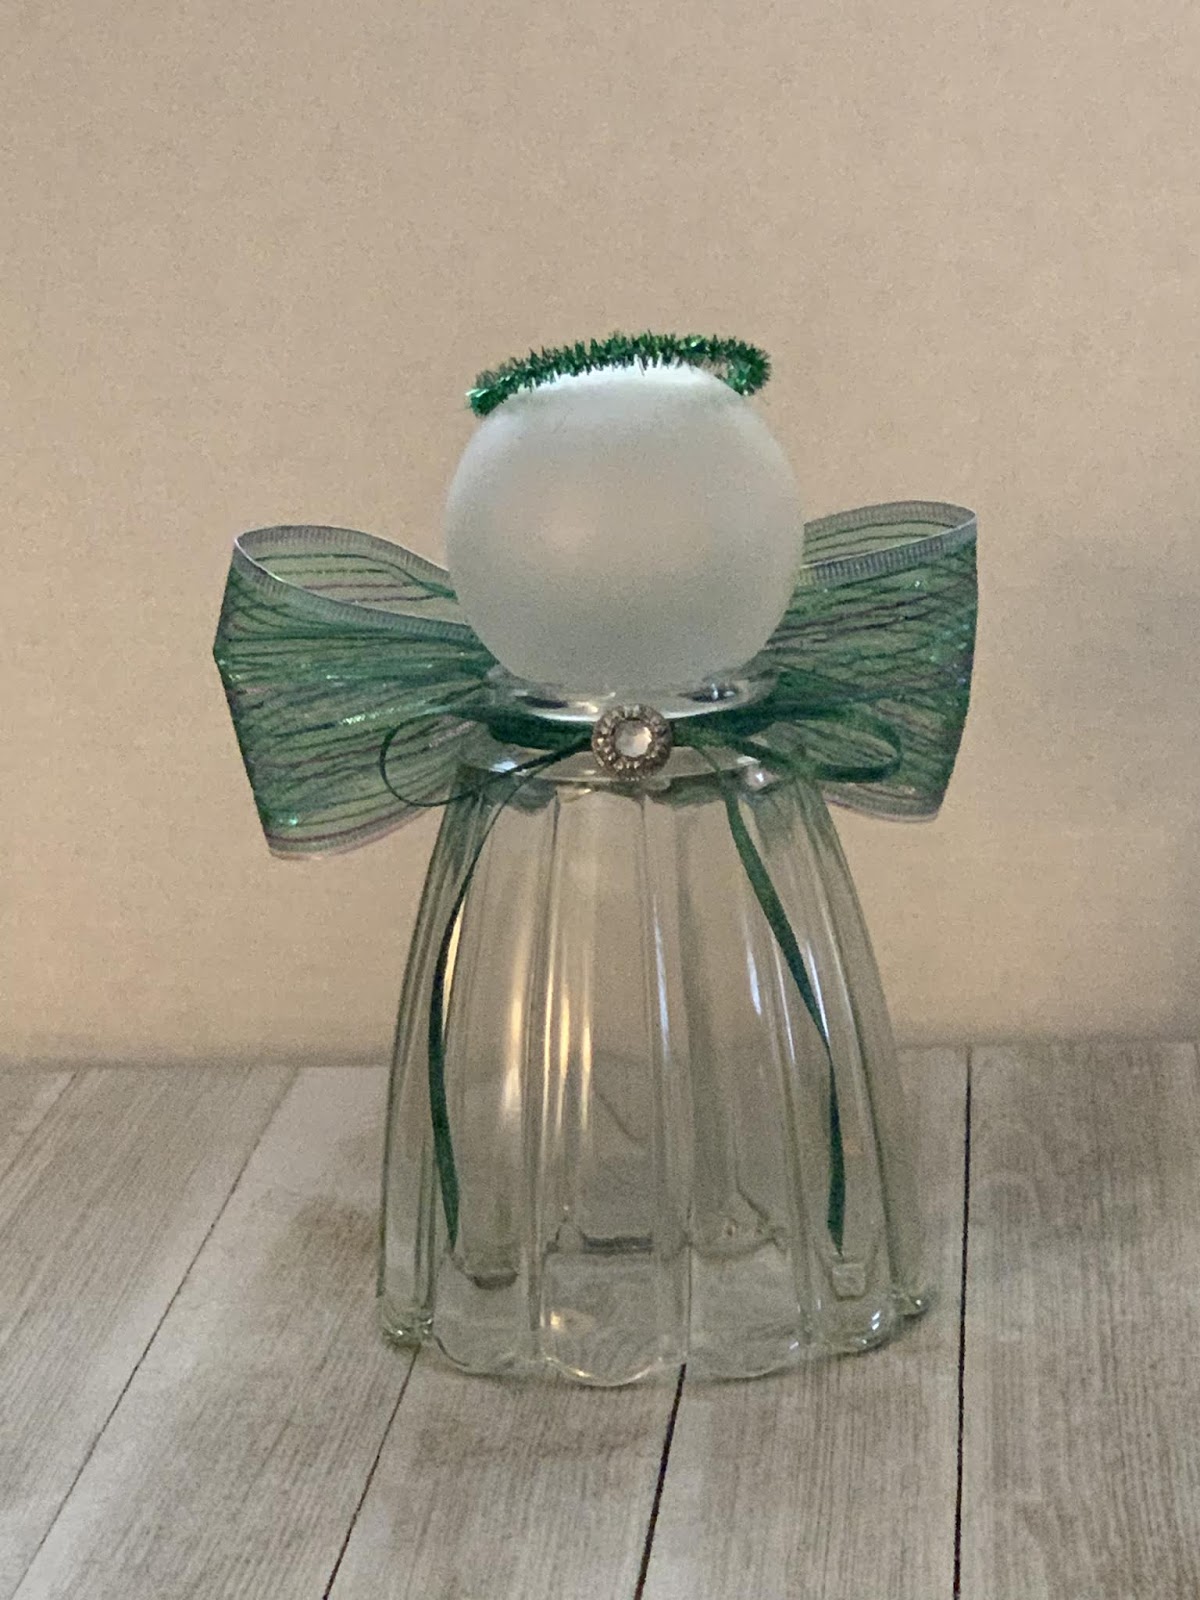 LilacsNDreams: Glass Angel Home Decor Repurposed Upcycled Restyled Handmade